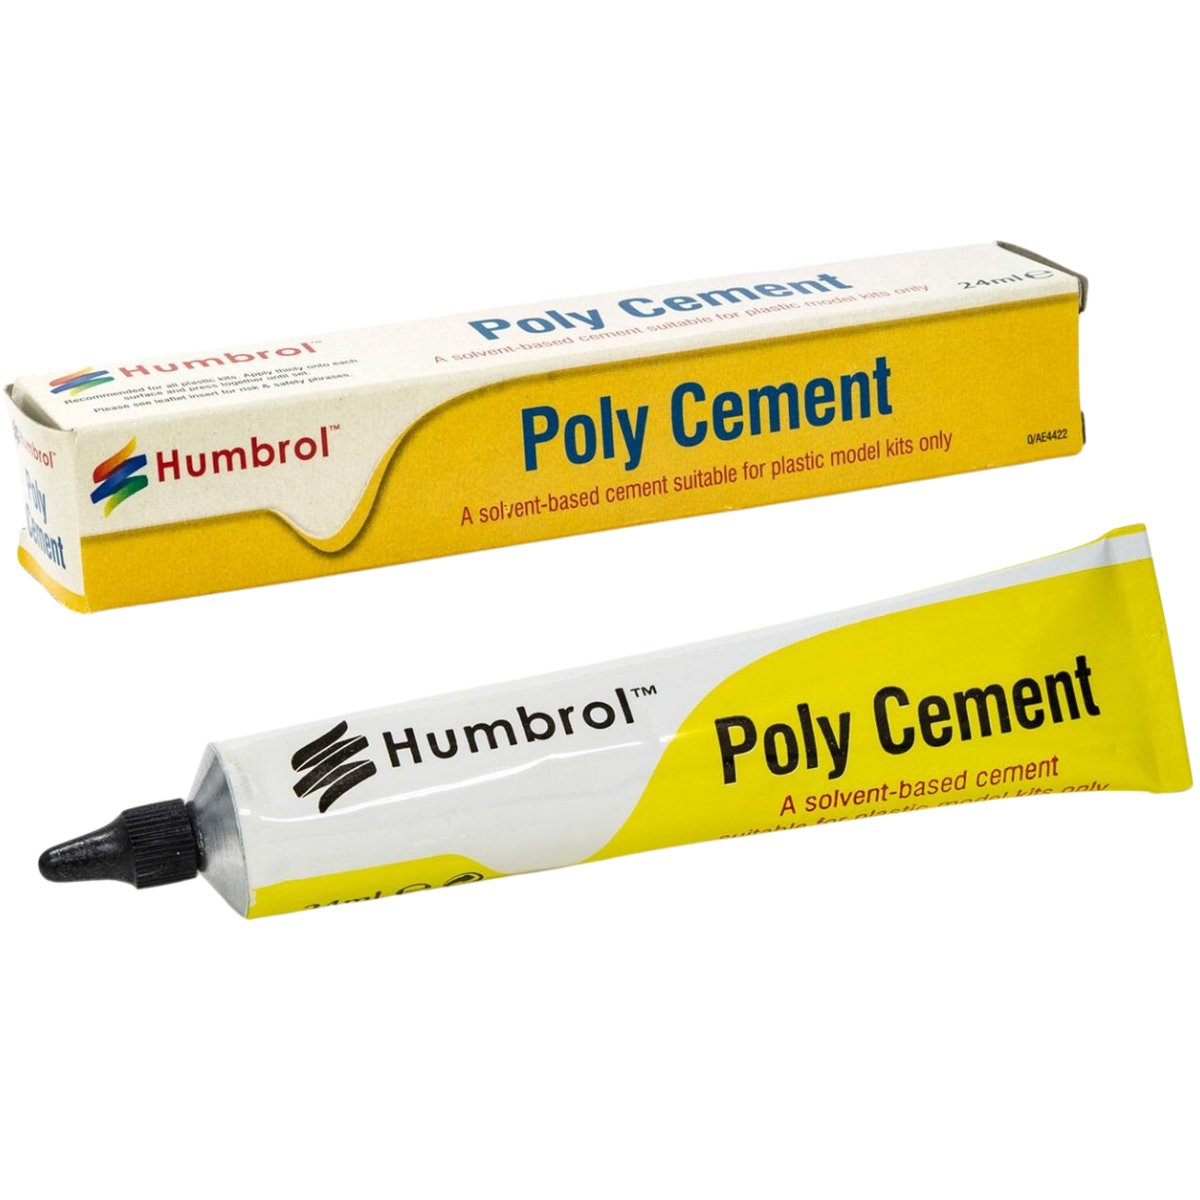 Humbrol AE4422 Poly Cement Large Tube 24ml